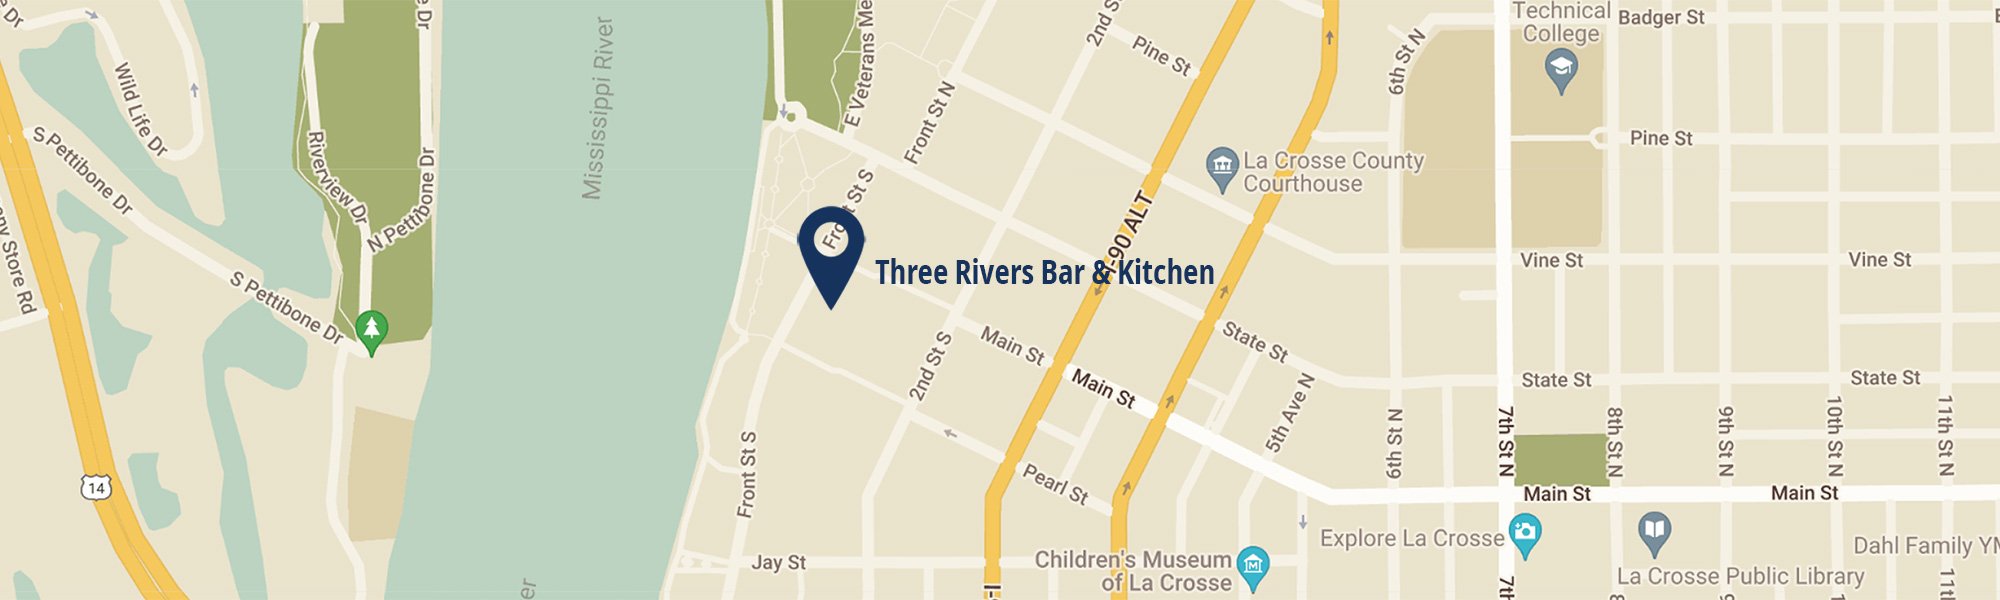 Map to Three Rivers Bar & Kitchen - Click for directions.